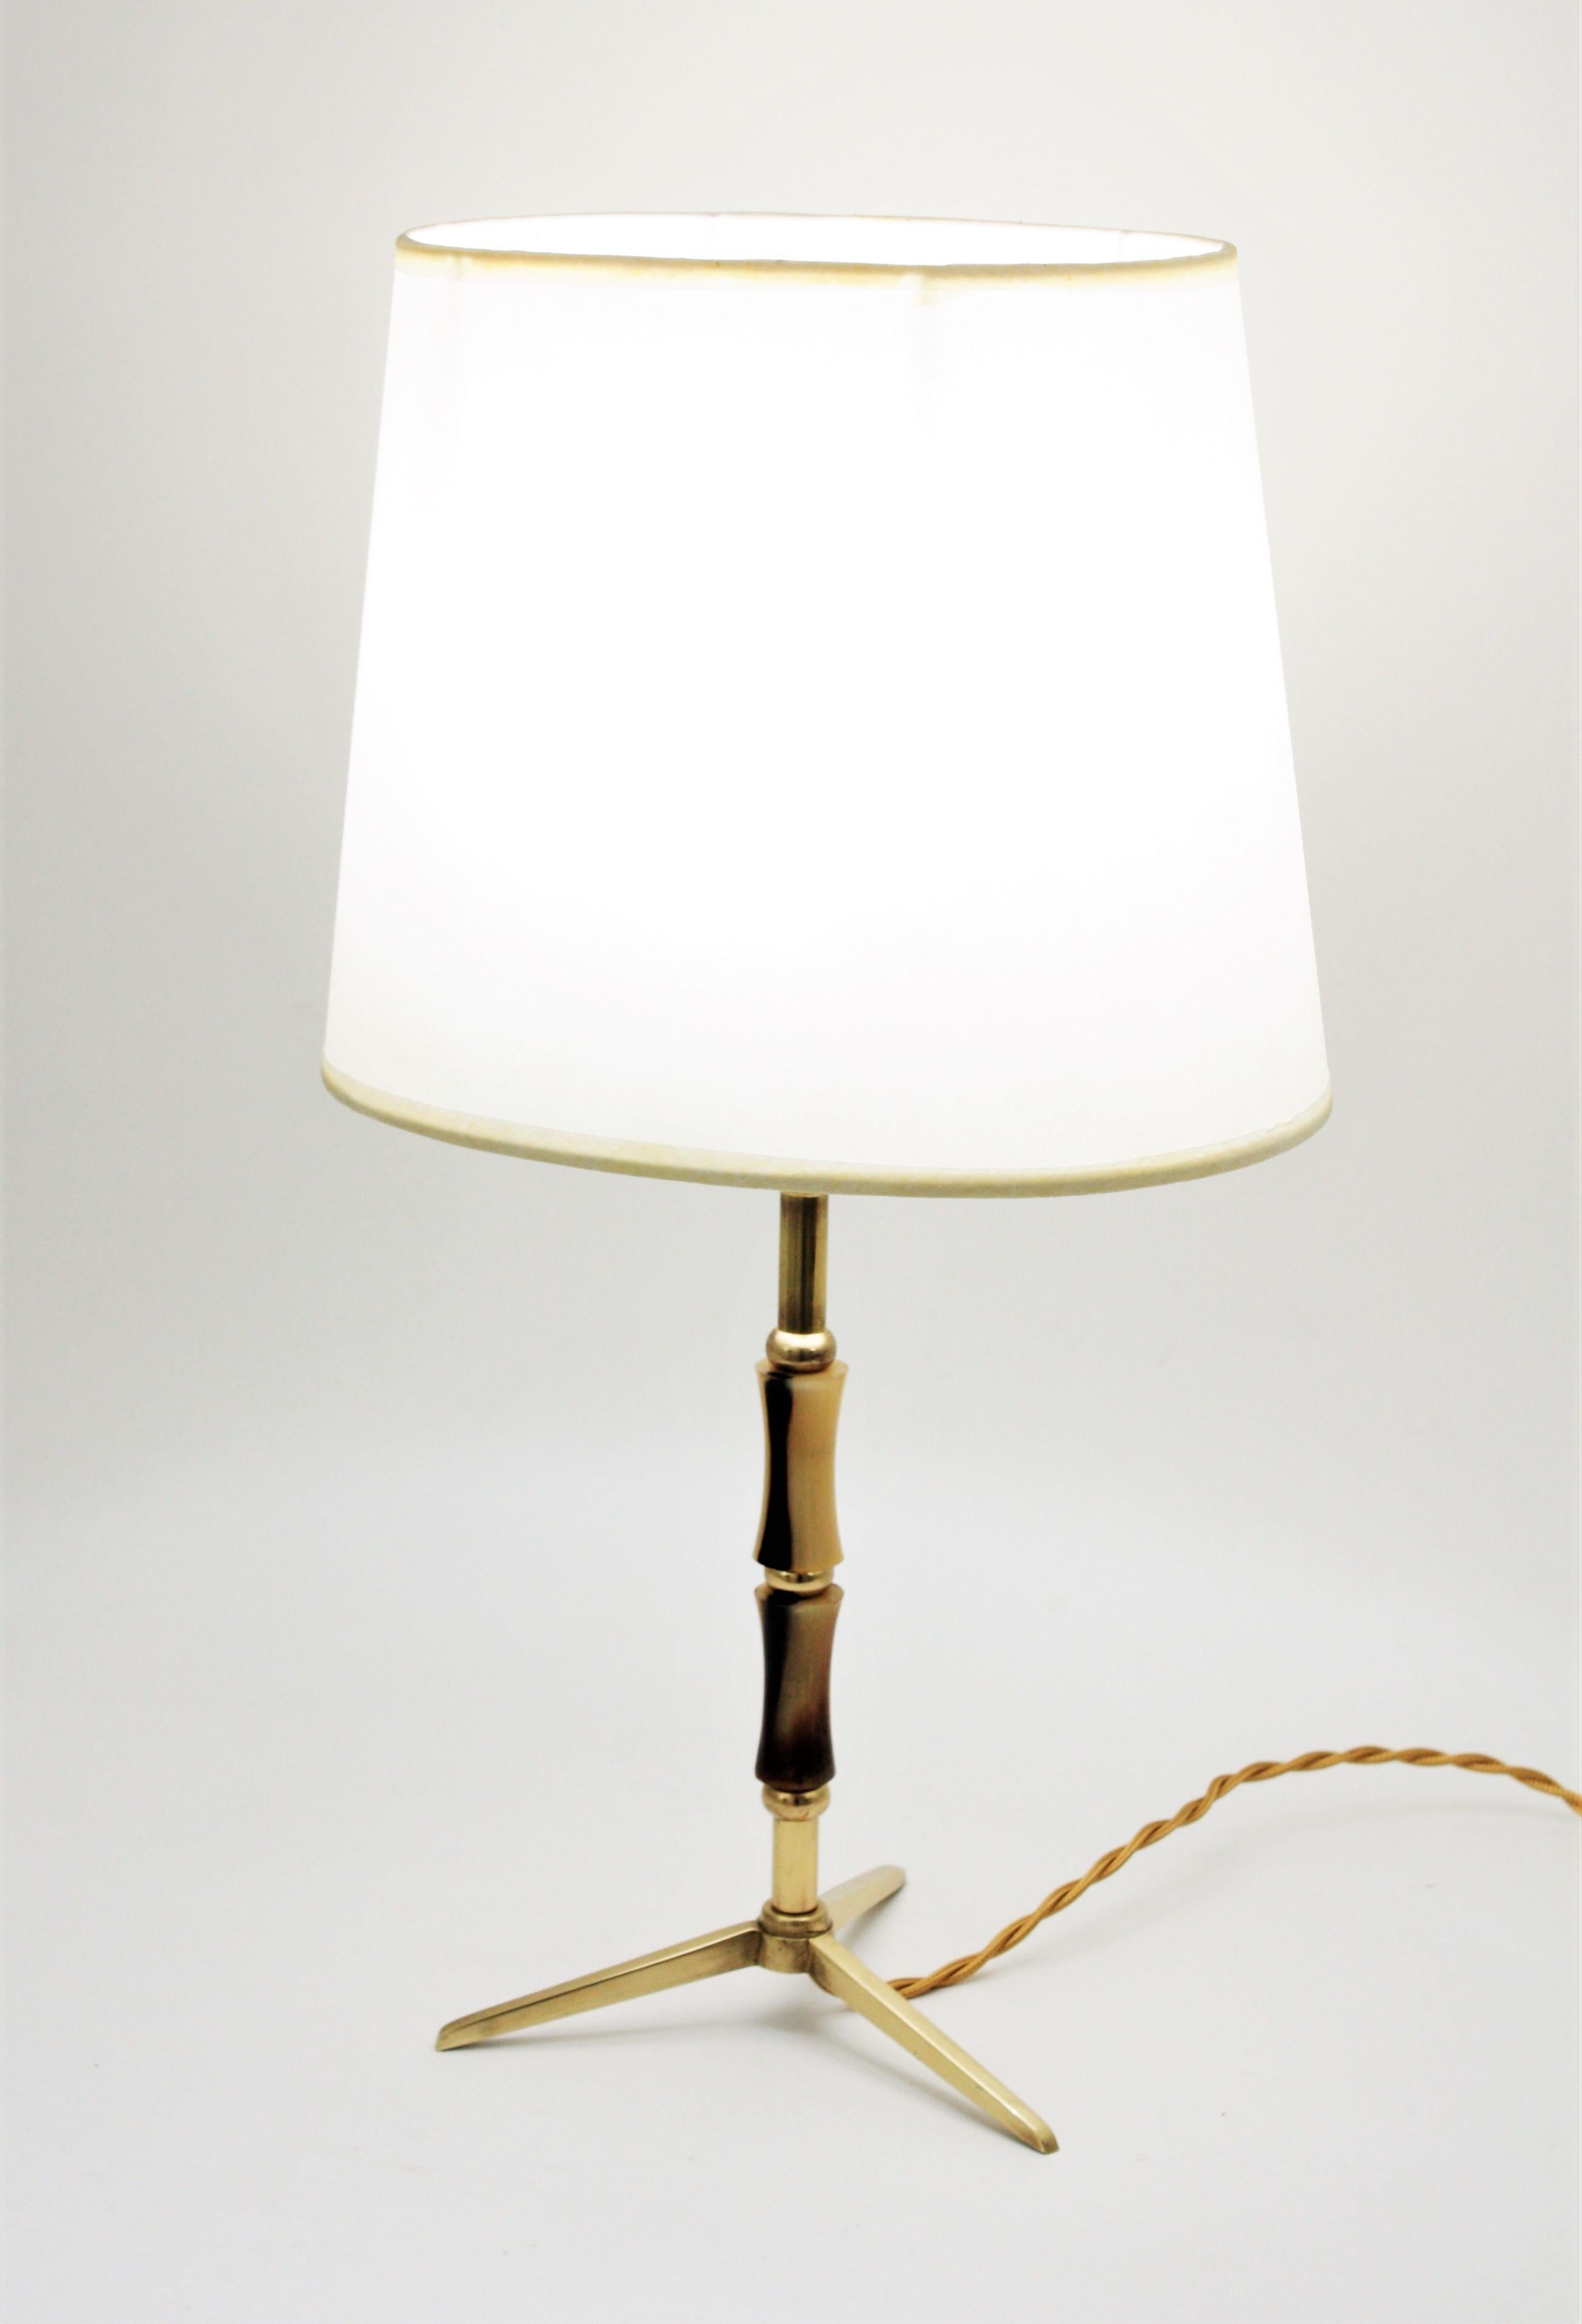 French Jacques Adnet Faux Bamboo Brass Tripod Table Lamp, 1950s